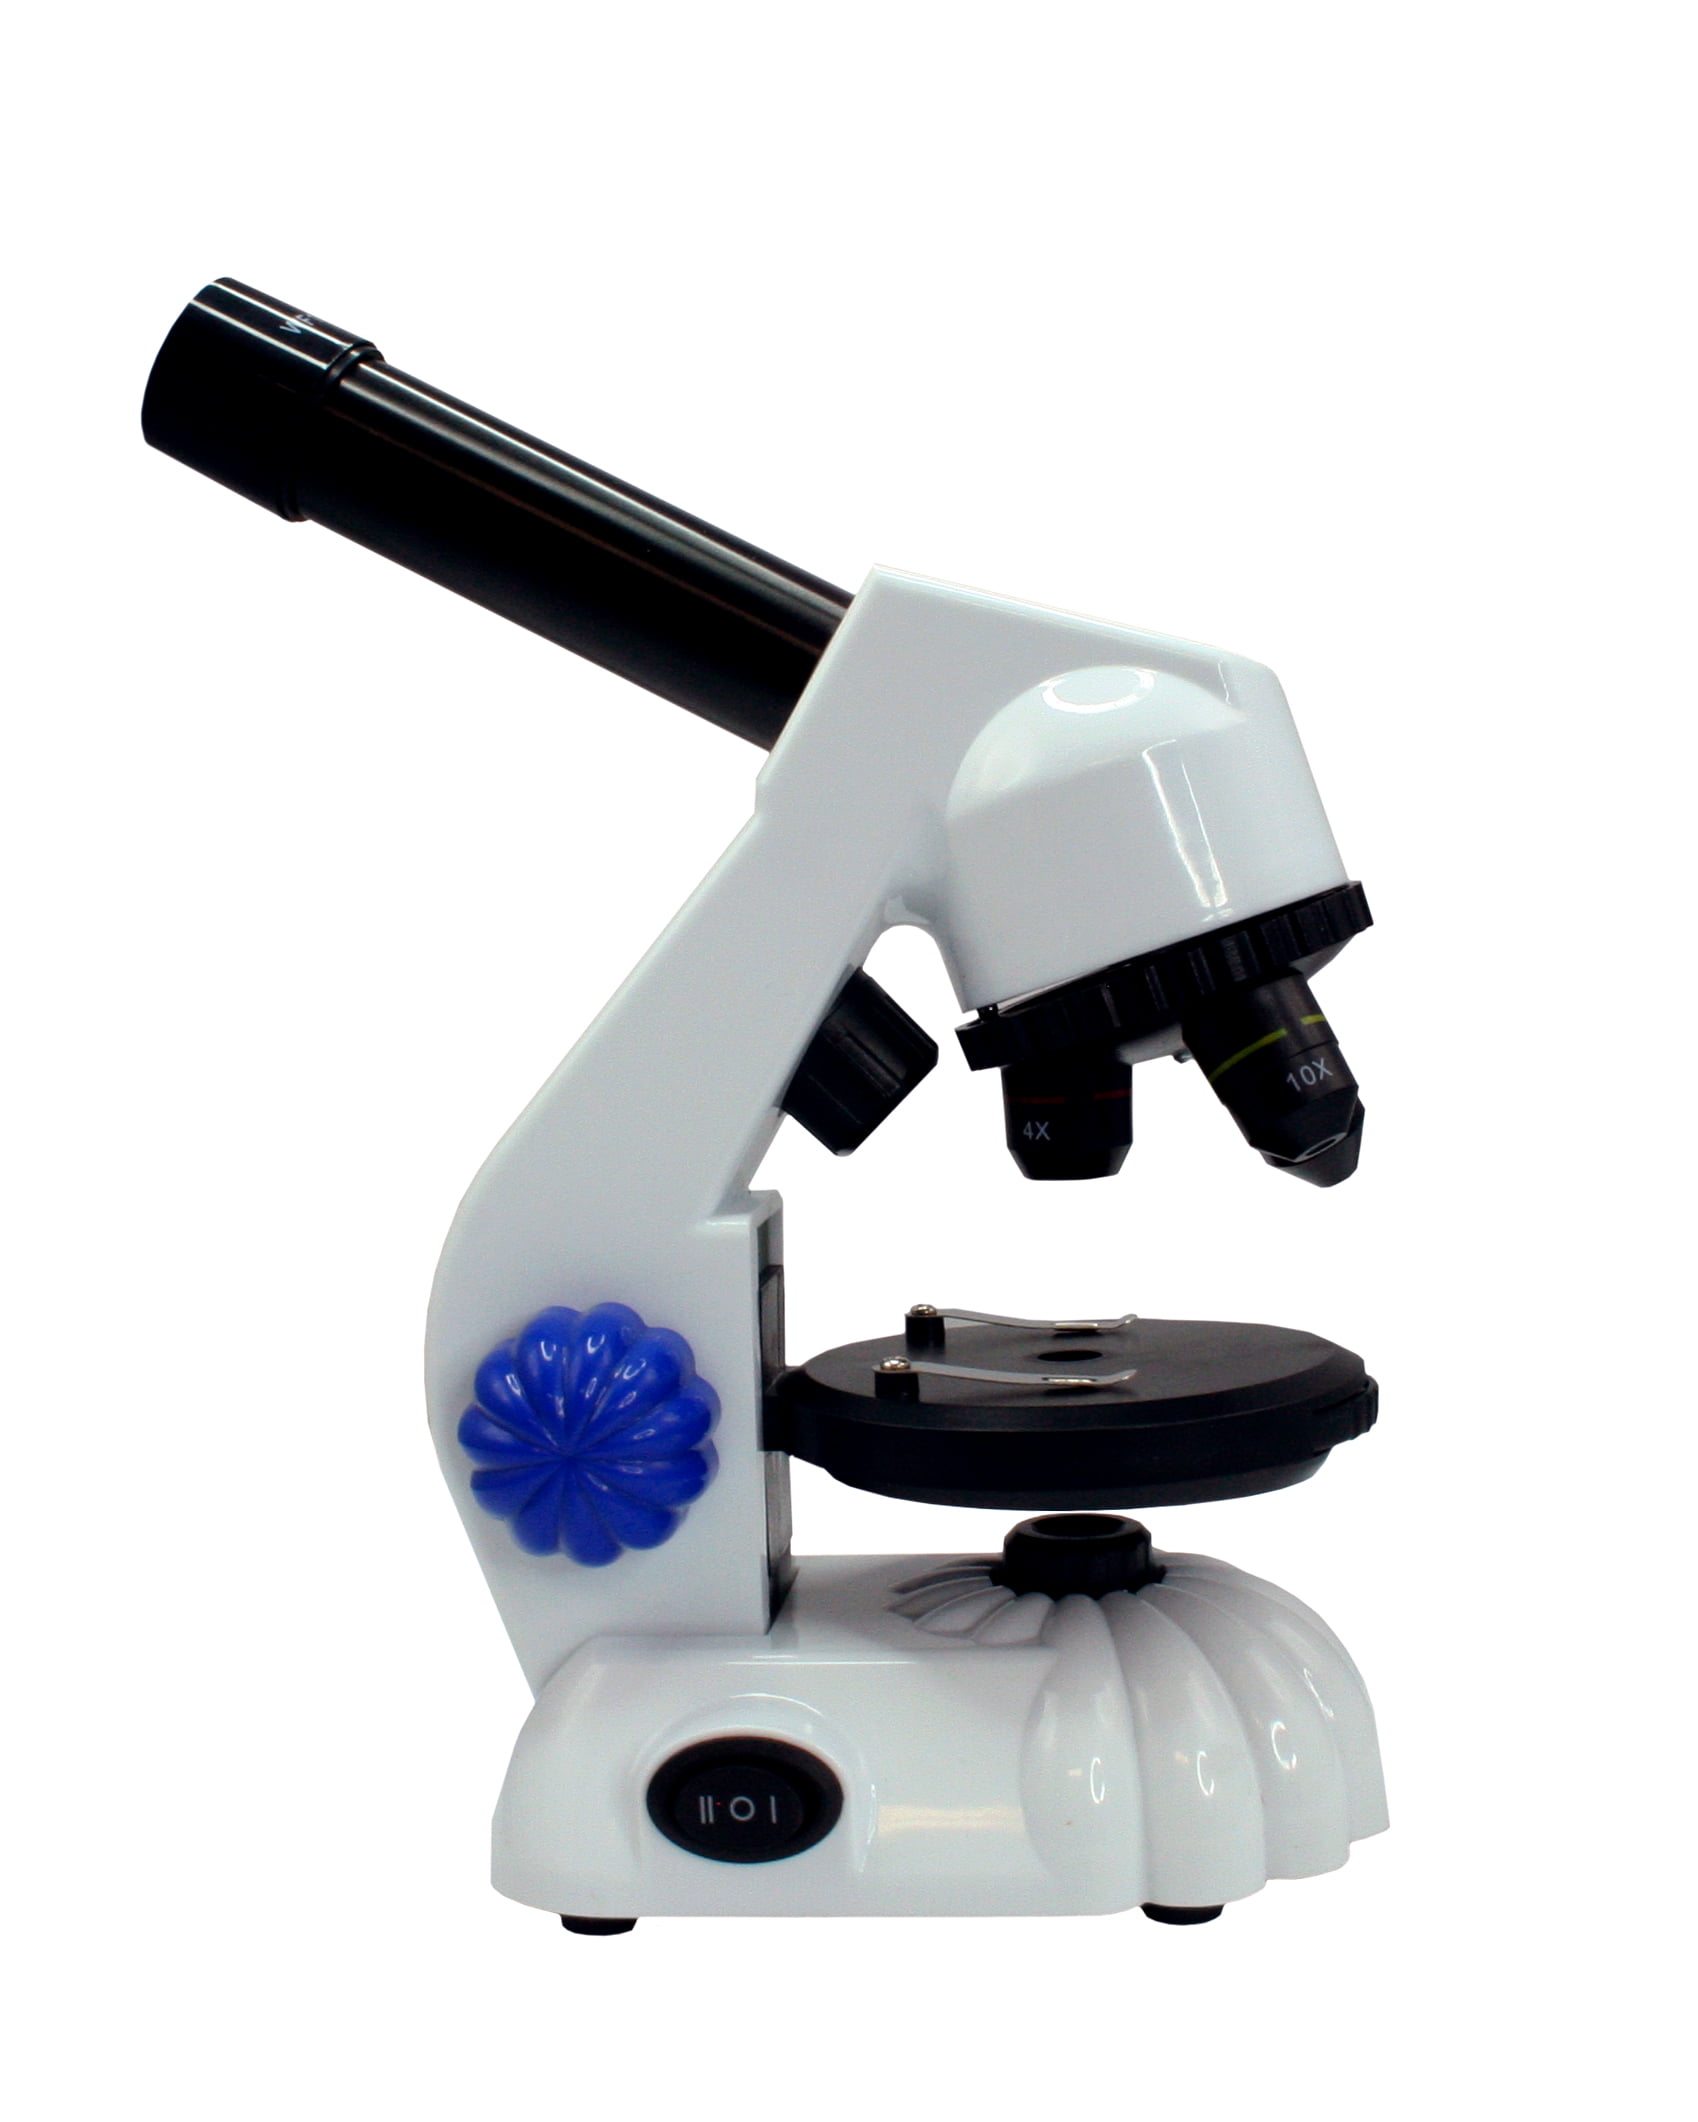 NEW IN BOX My First Lab Student Duo-Scope Dual Light MICROSCOPE 40X 400X 